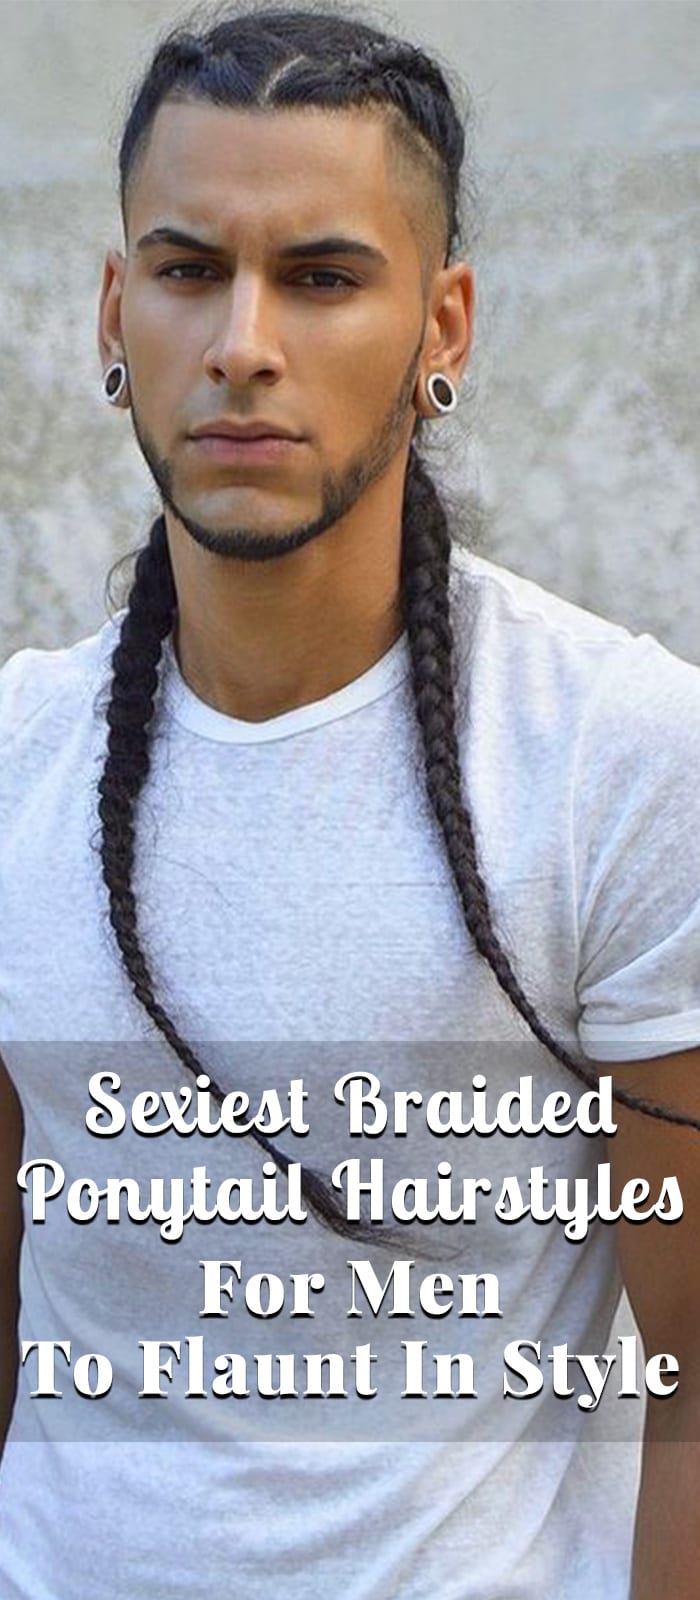 Sexiest Braided Ponytail Hairstyles For Men To Flaunt In Style